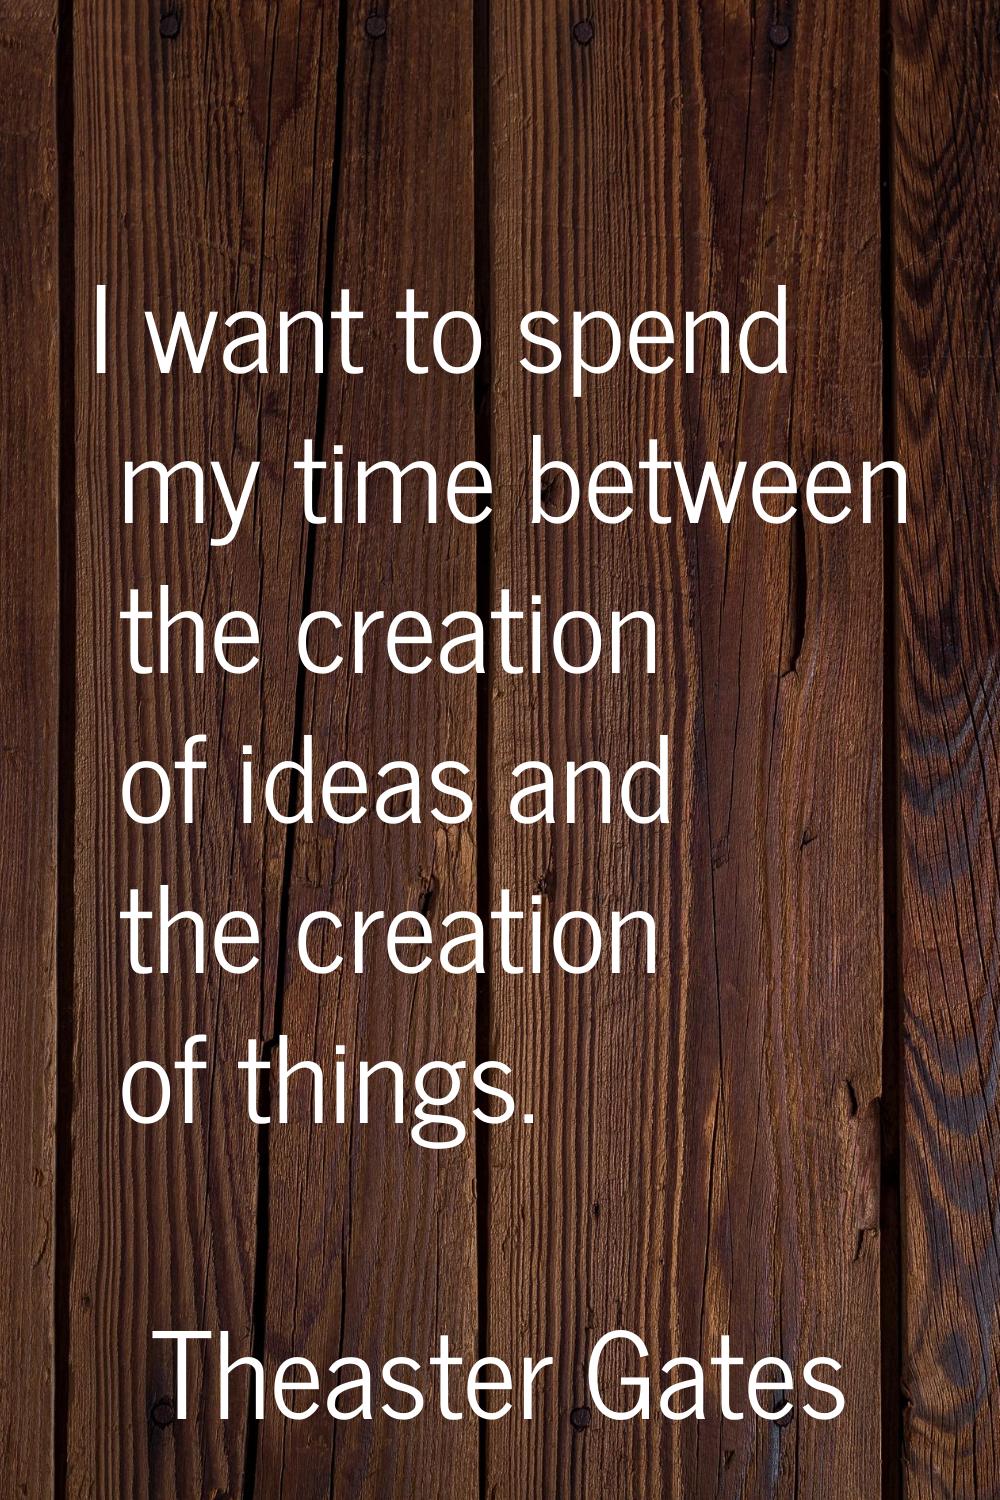 I want to spend my time between the creation of ideas and the creation of things.